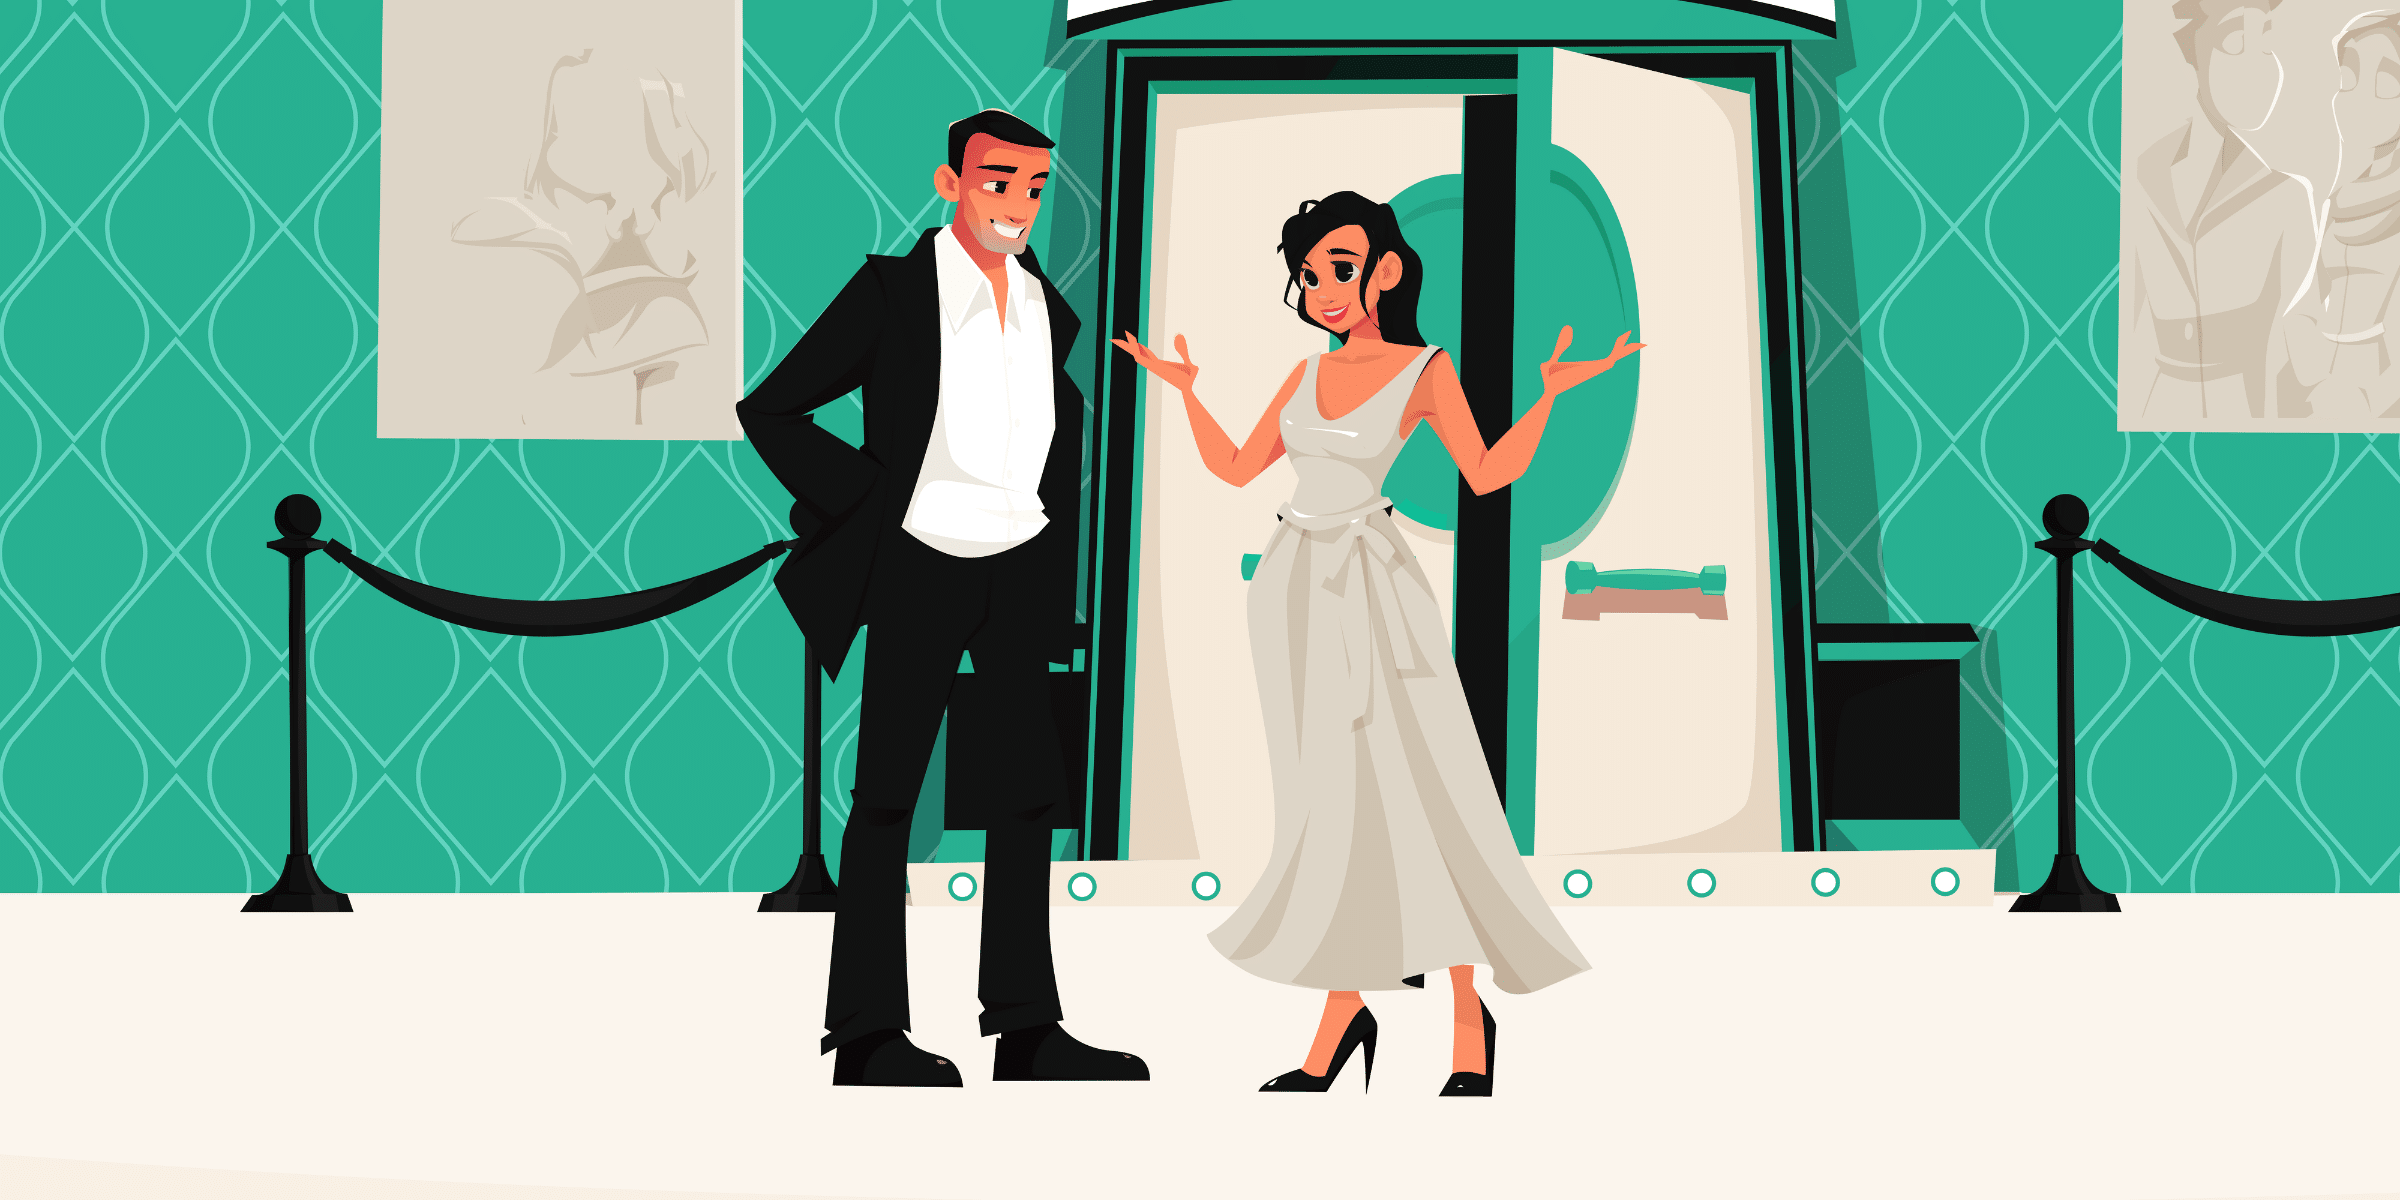 Want to make a great first-date impression? Our first-date etiquette guide covers all the best tips and tricks to help you leave a lasting impression.